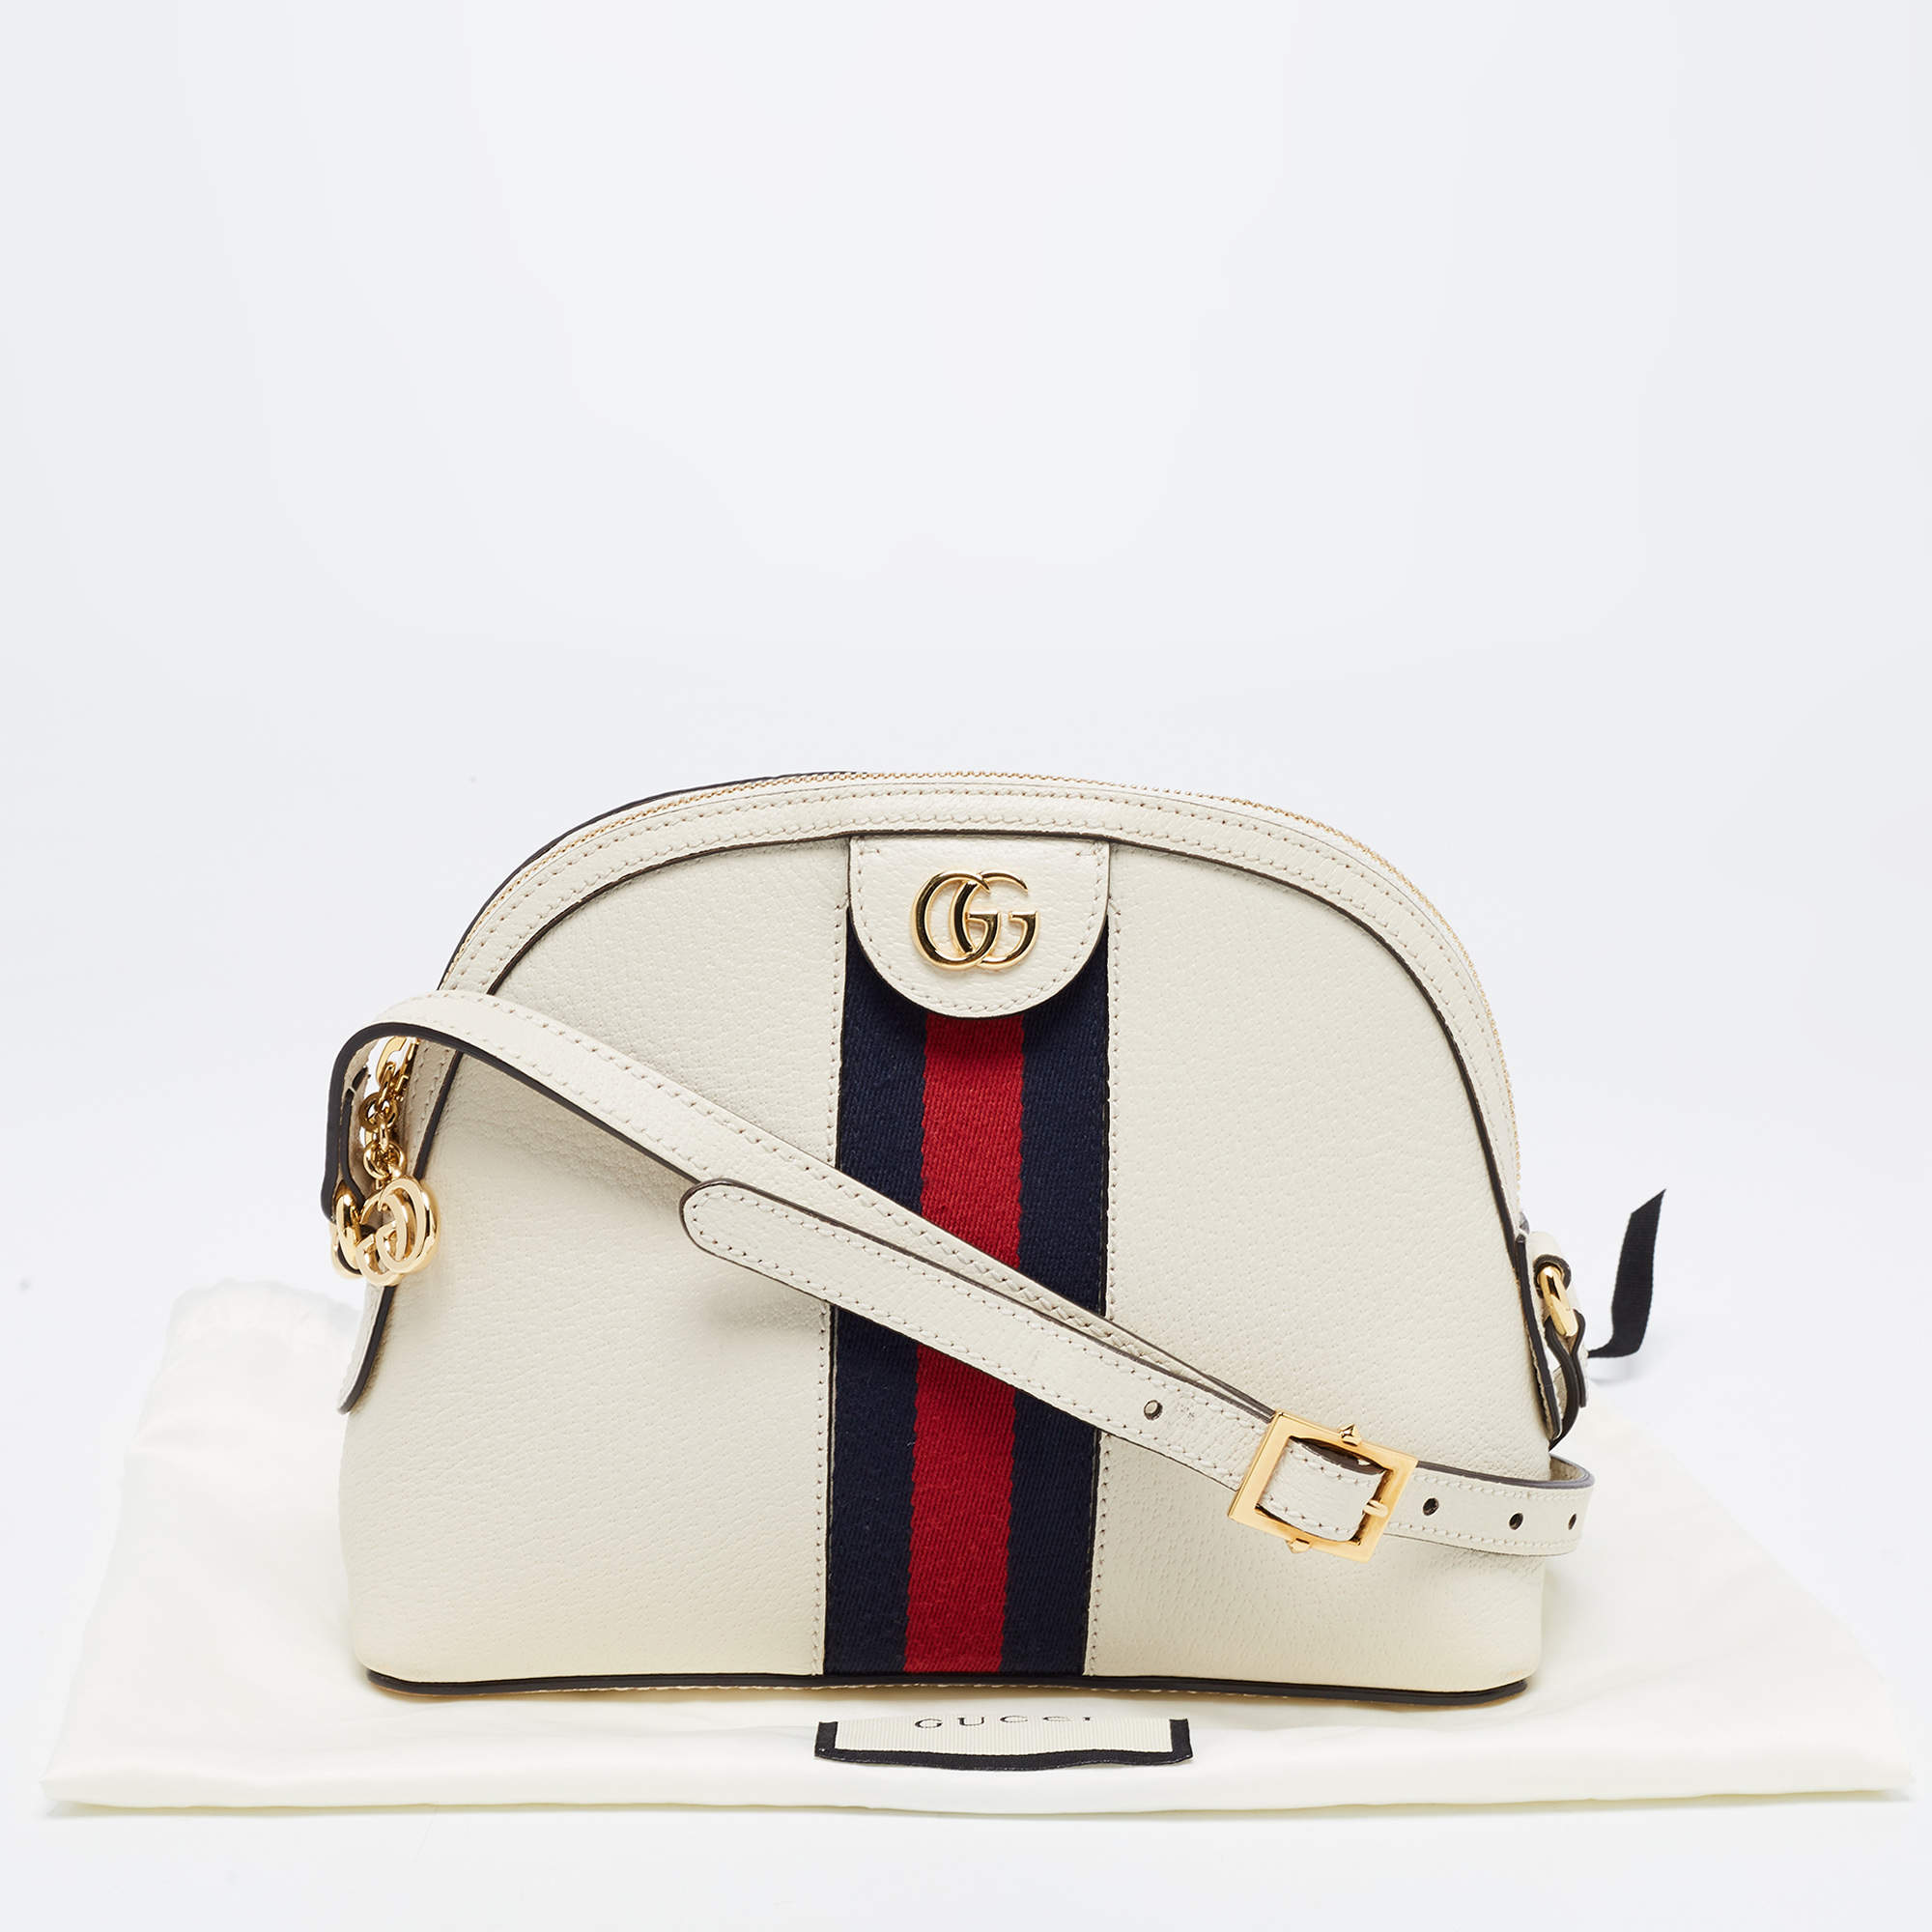 Gucci Ophidia GG Small Shoulder Bag - White